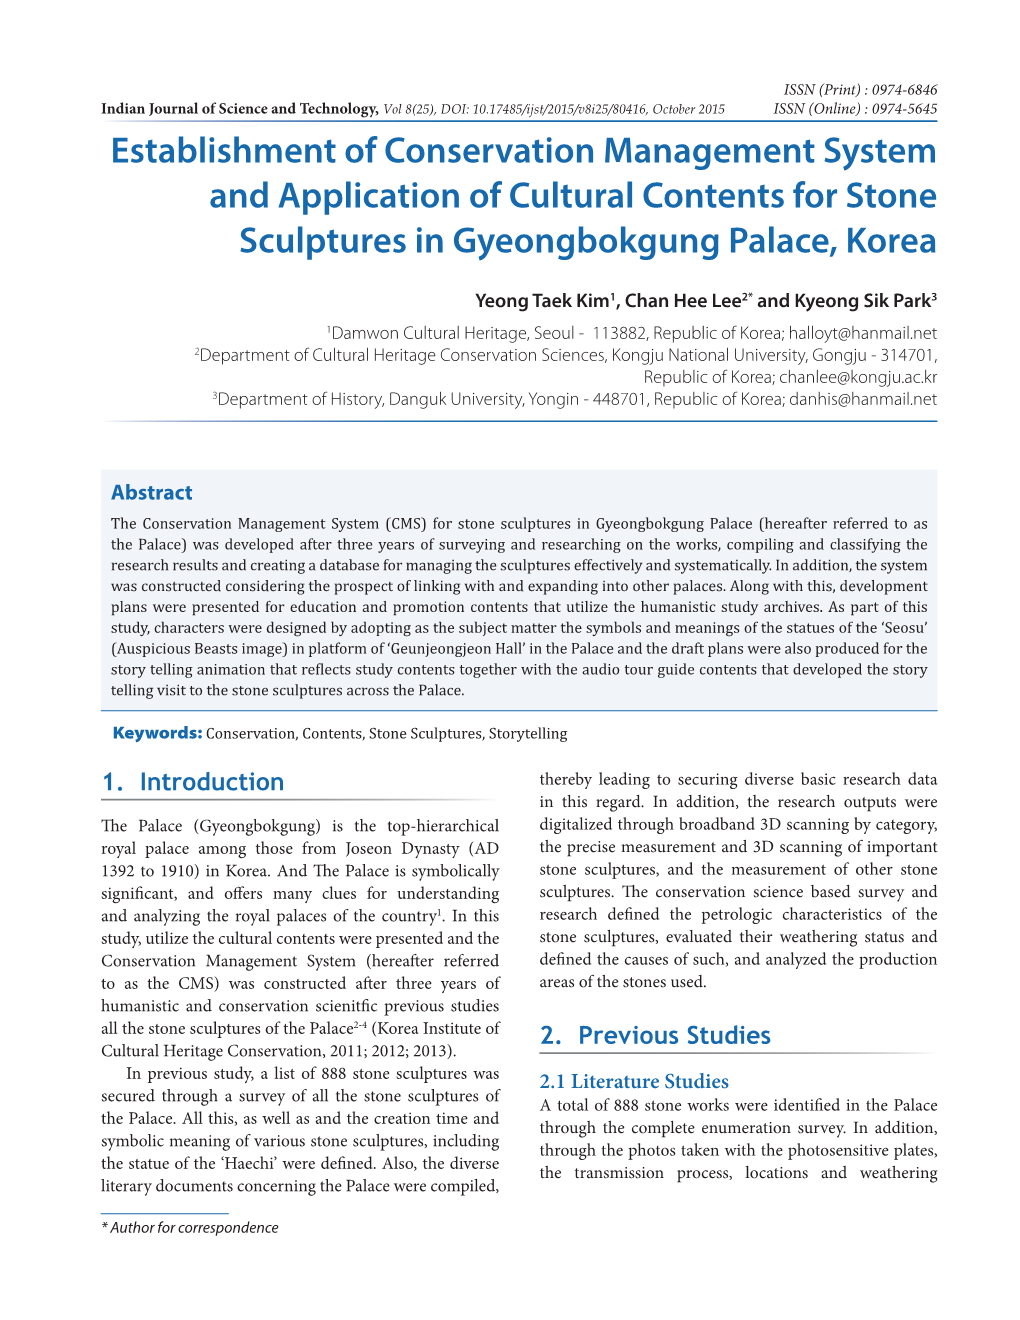 Establishment of Conservation Management System and Application of Cultural Contents for Stone Sculptures in Gyeongbokgung Palace, Korea